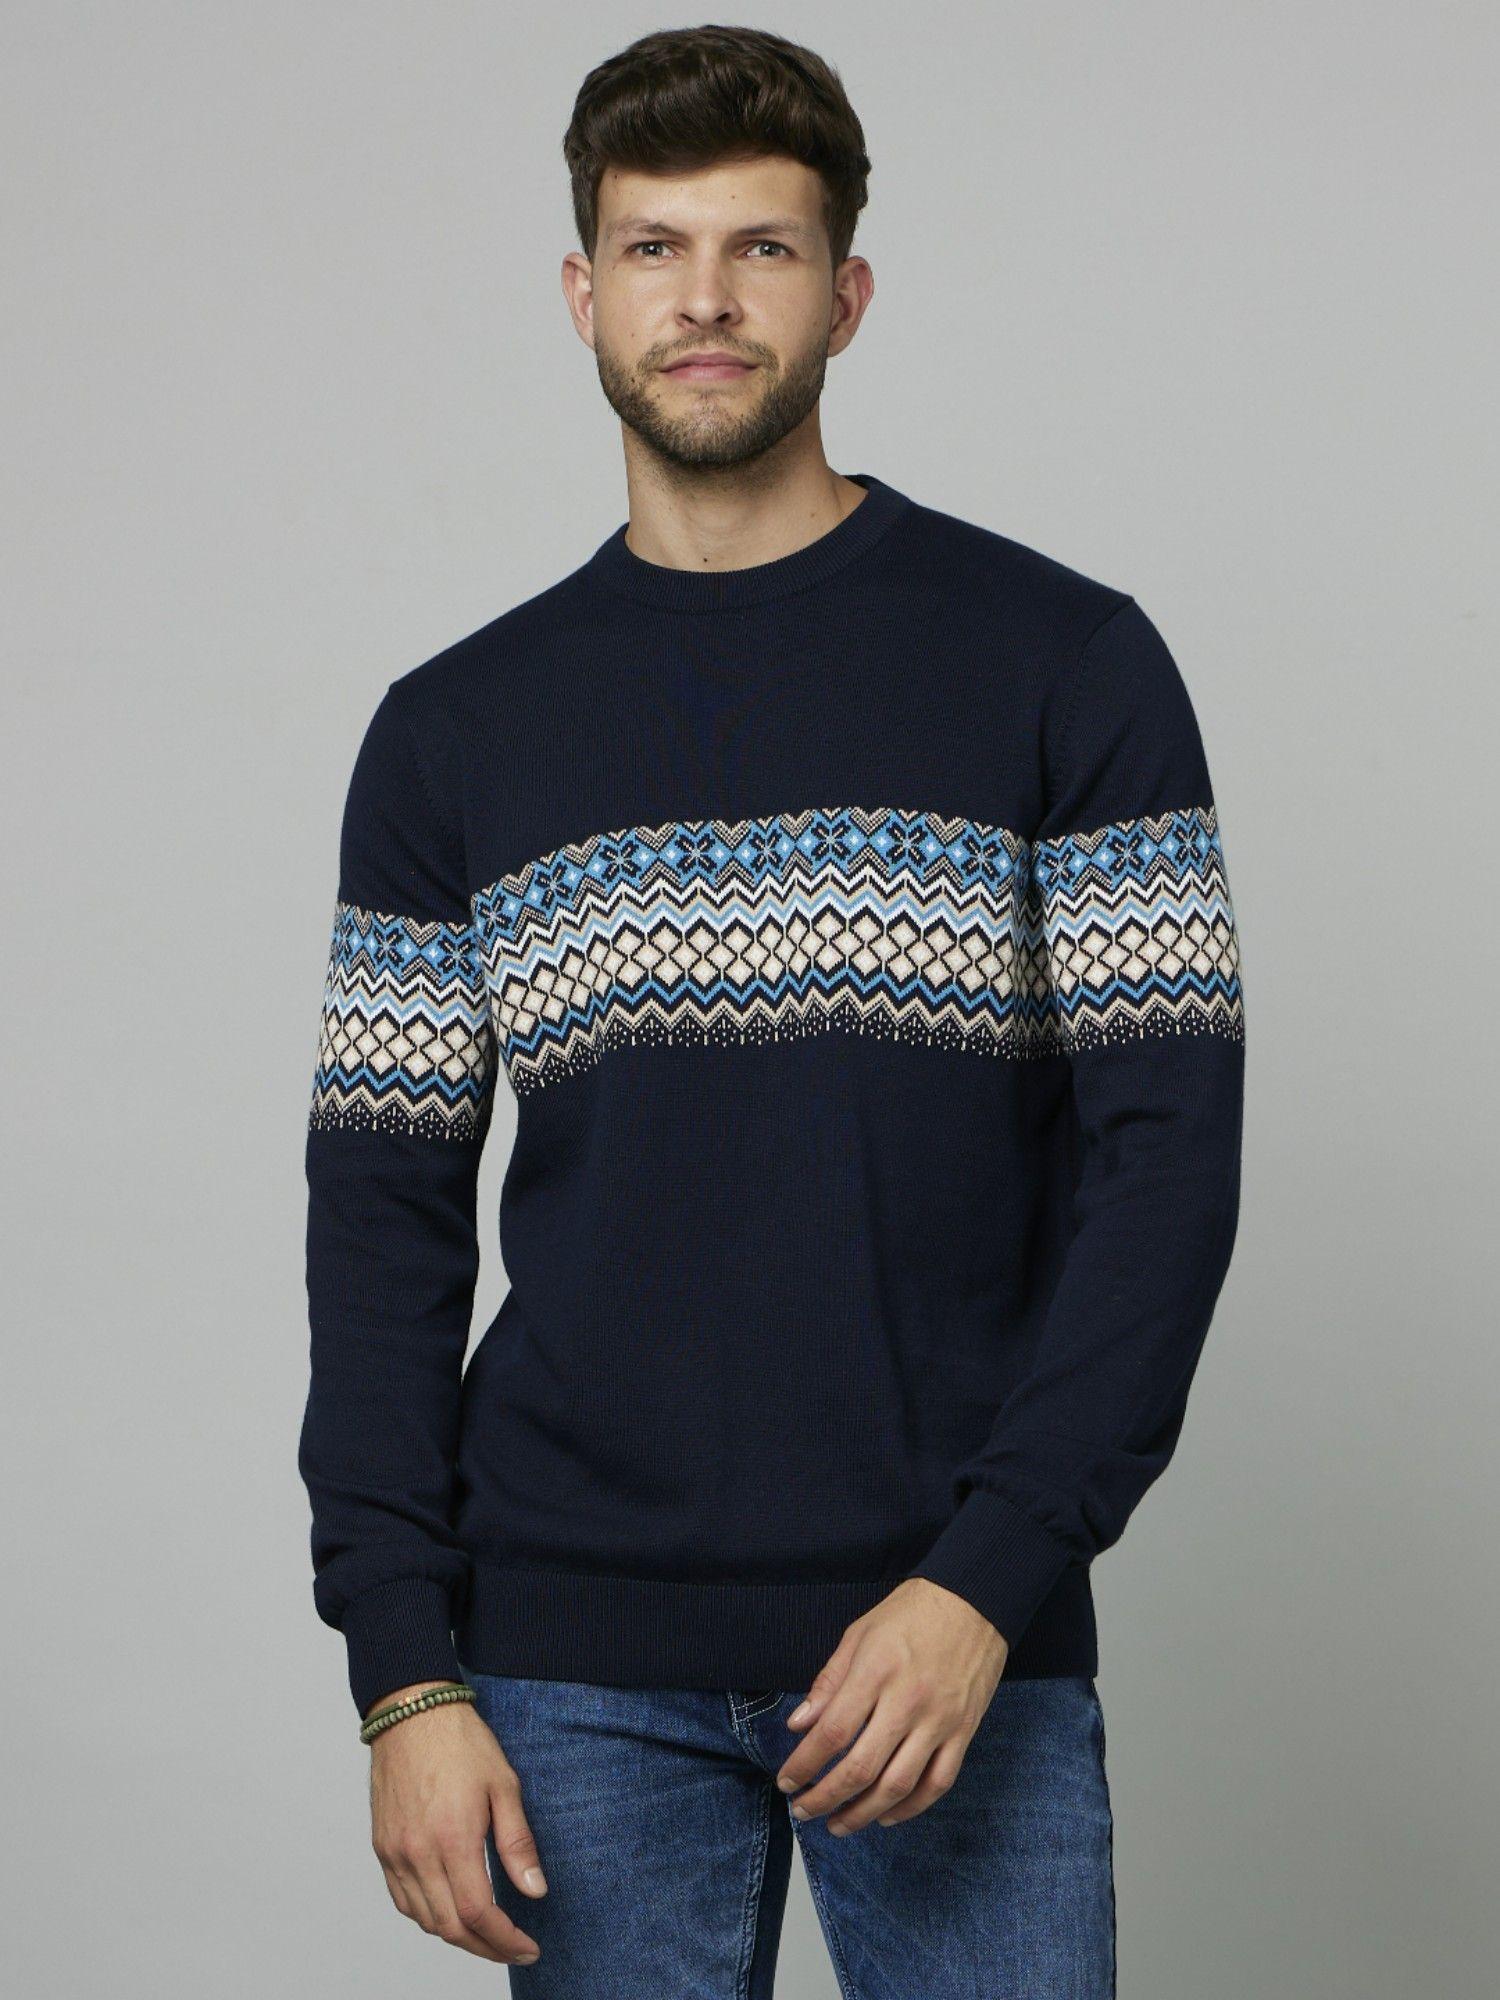 Printed Navy Blue Long Sleeves Round Neck Structured Sweater